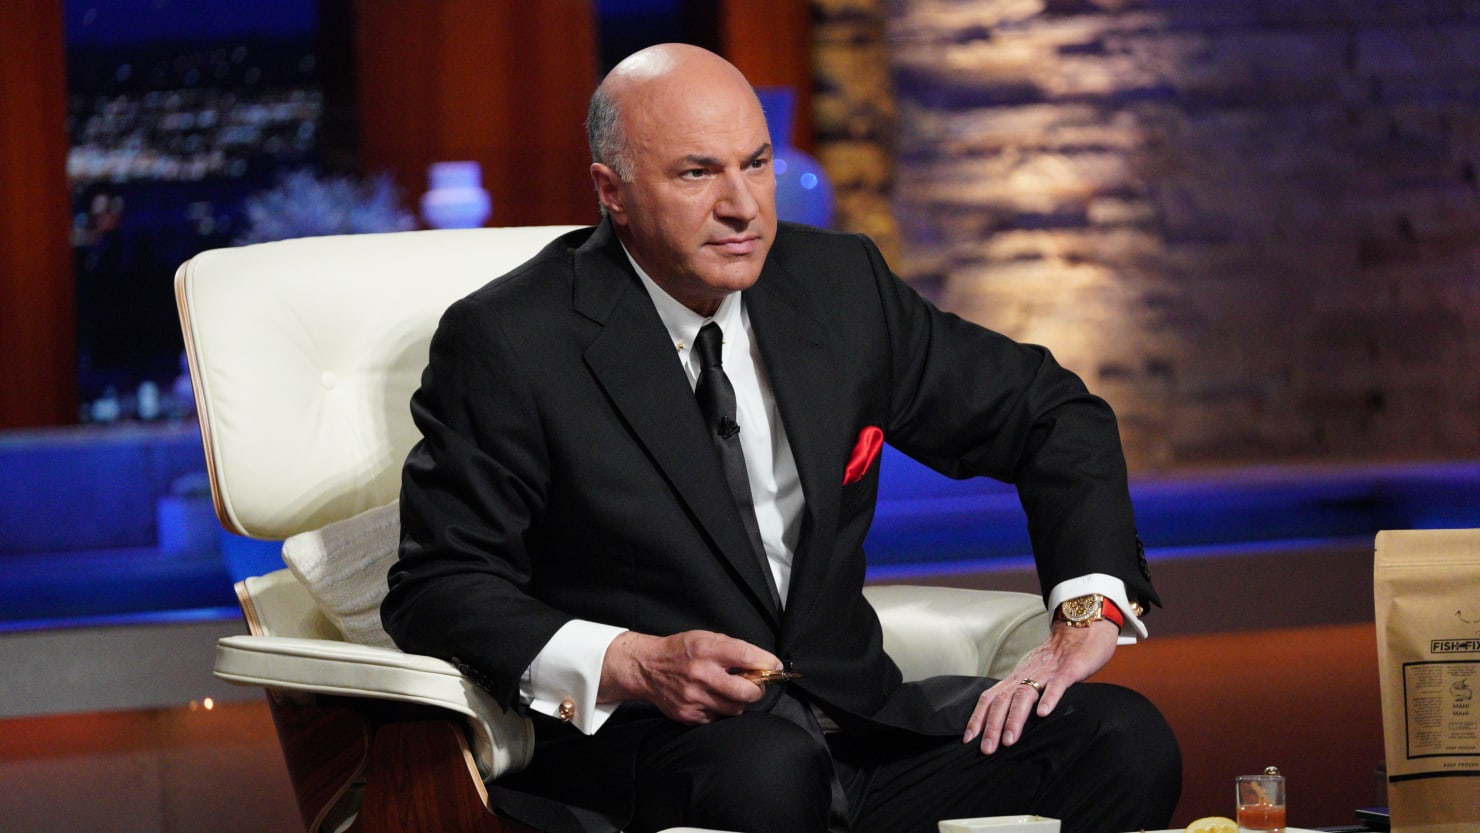 Shark Tank's Kevin O'Leary: I Look Like an Idiot for Flogging FTX